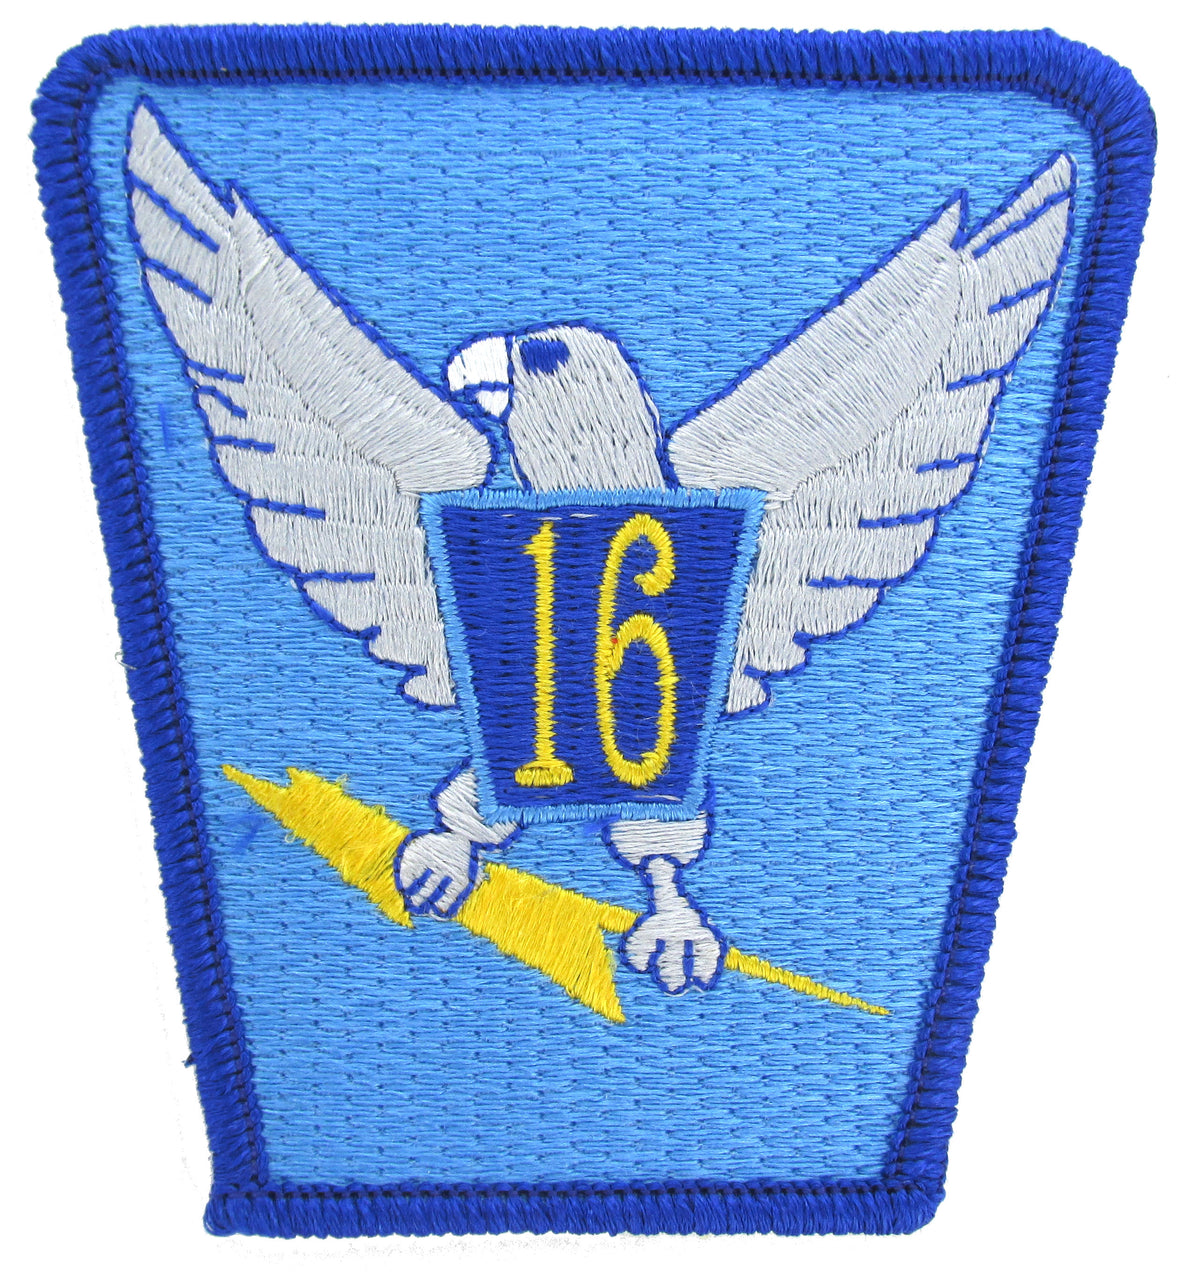 USAF Academy 16th Cadet Squadron Patch - Proud Chicken Hawks 